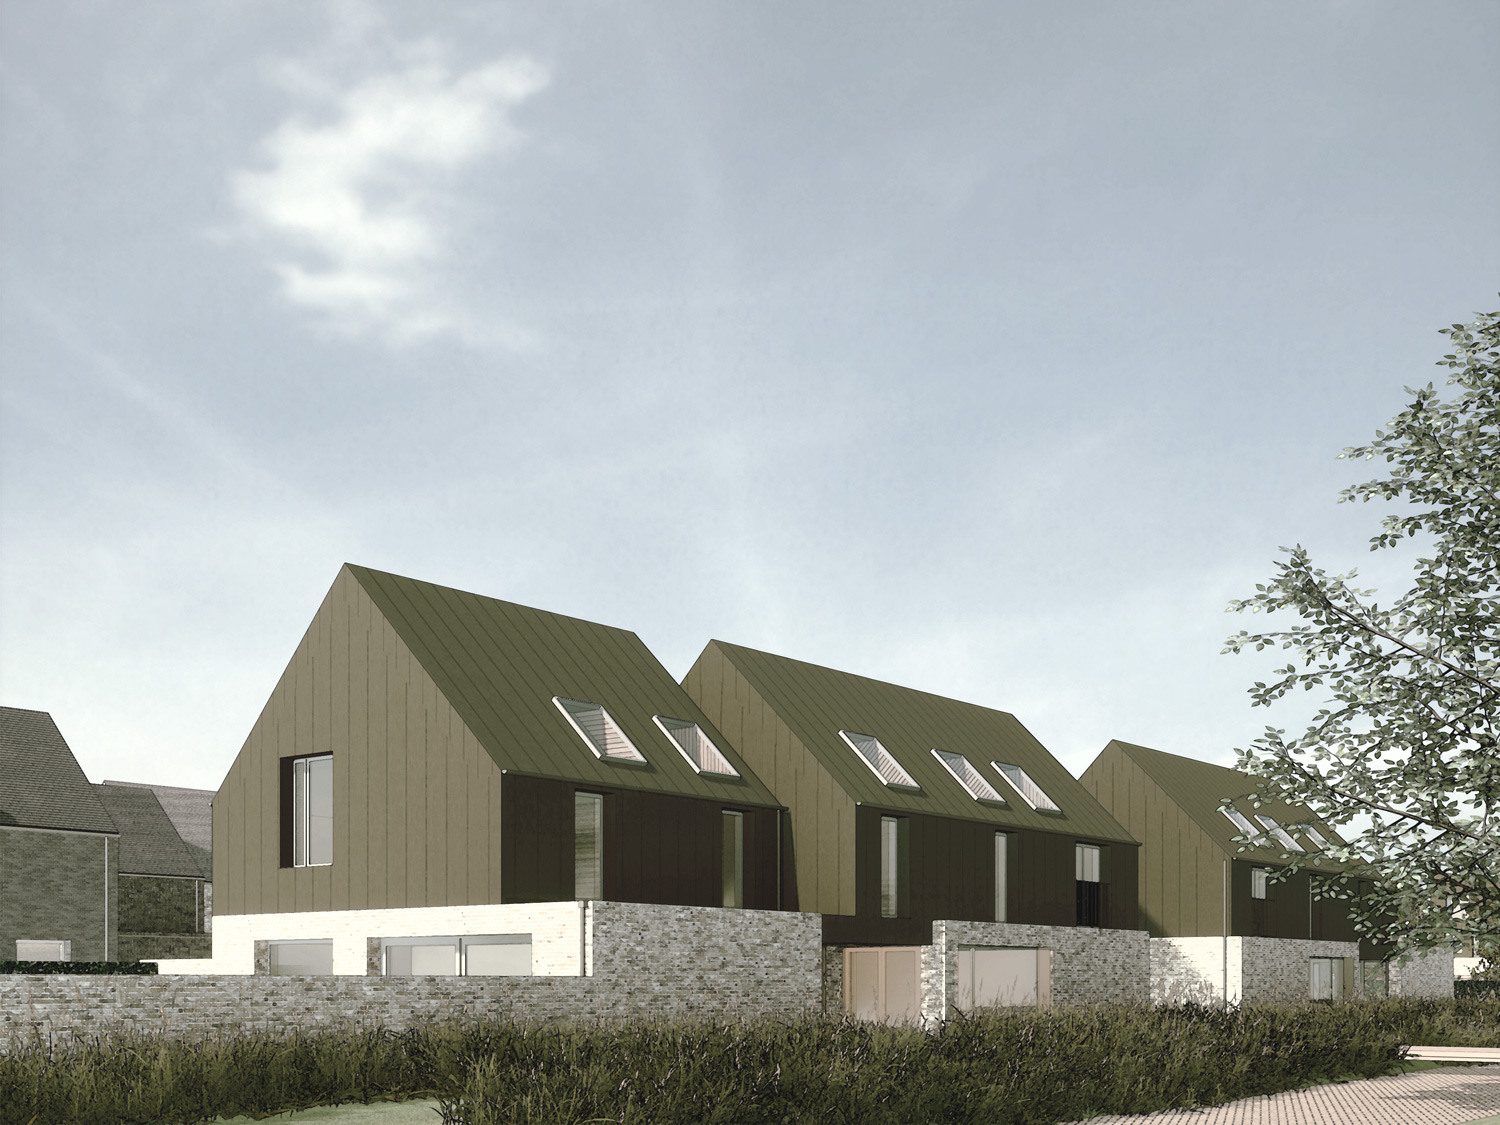 Visualisation by CDC studio of three Woodland Villa houses lined up